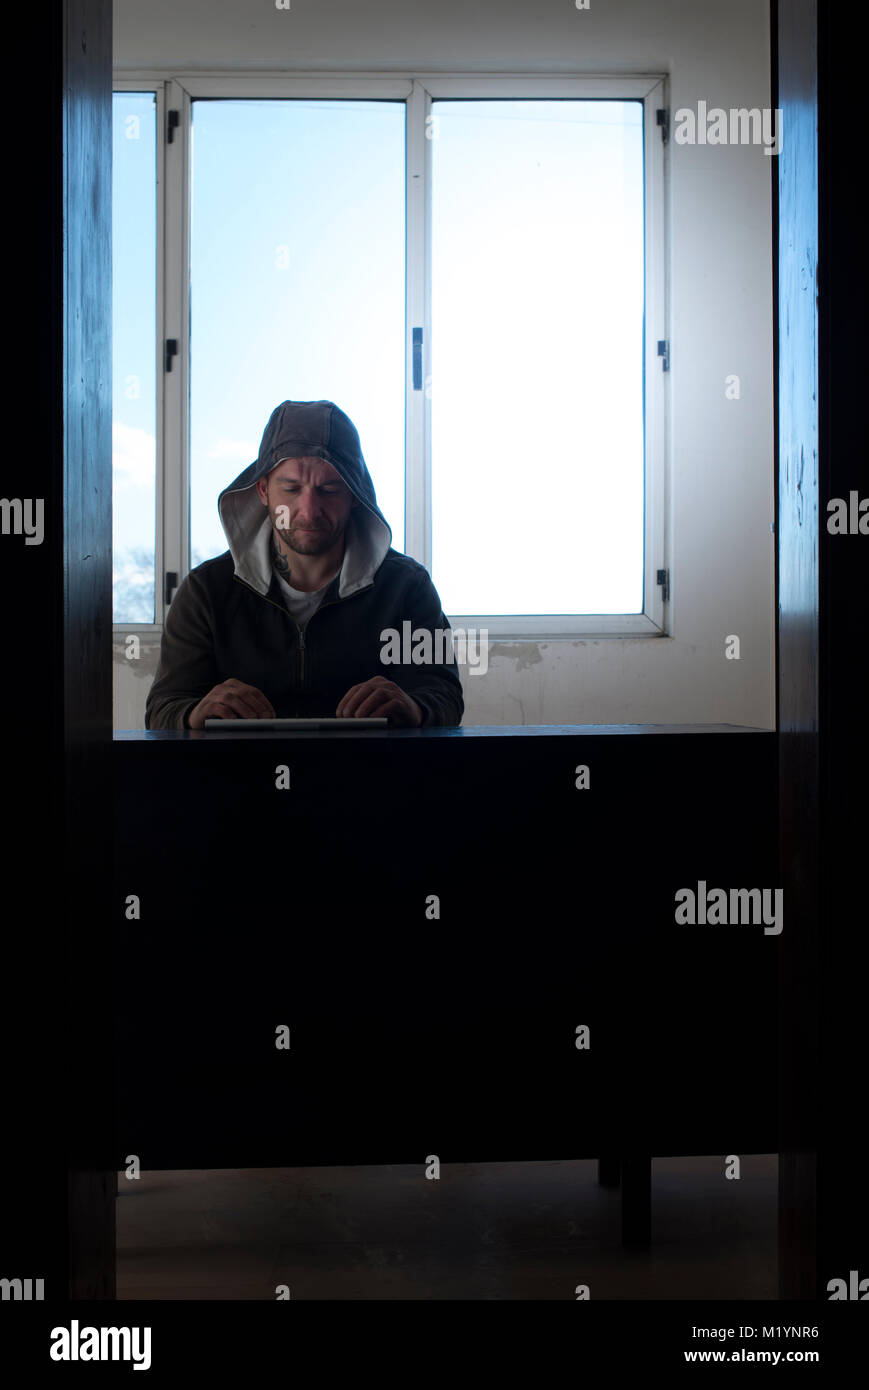 Hacker in a room with illuminated window. Stock Photo